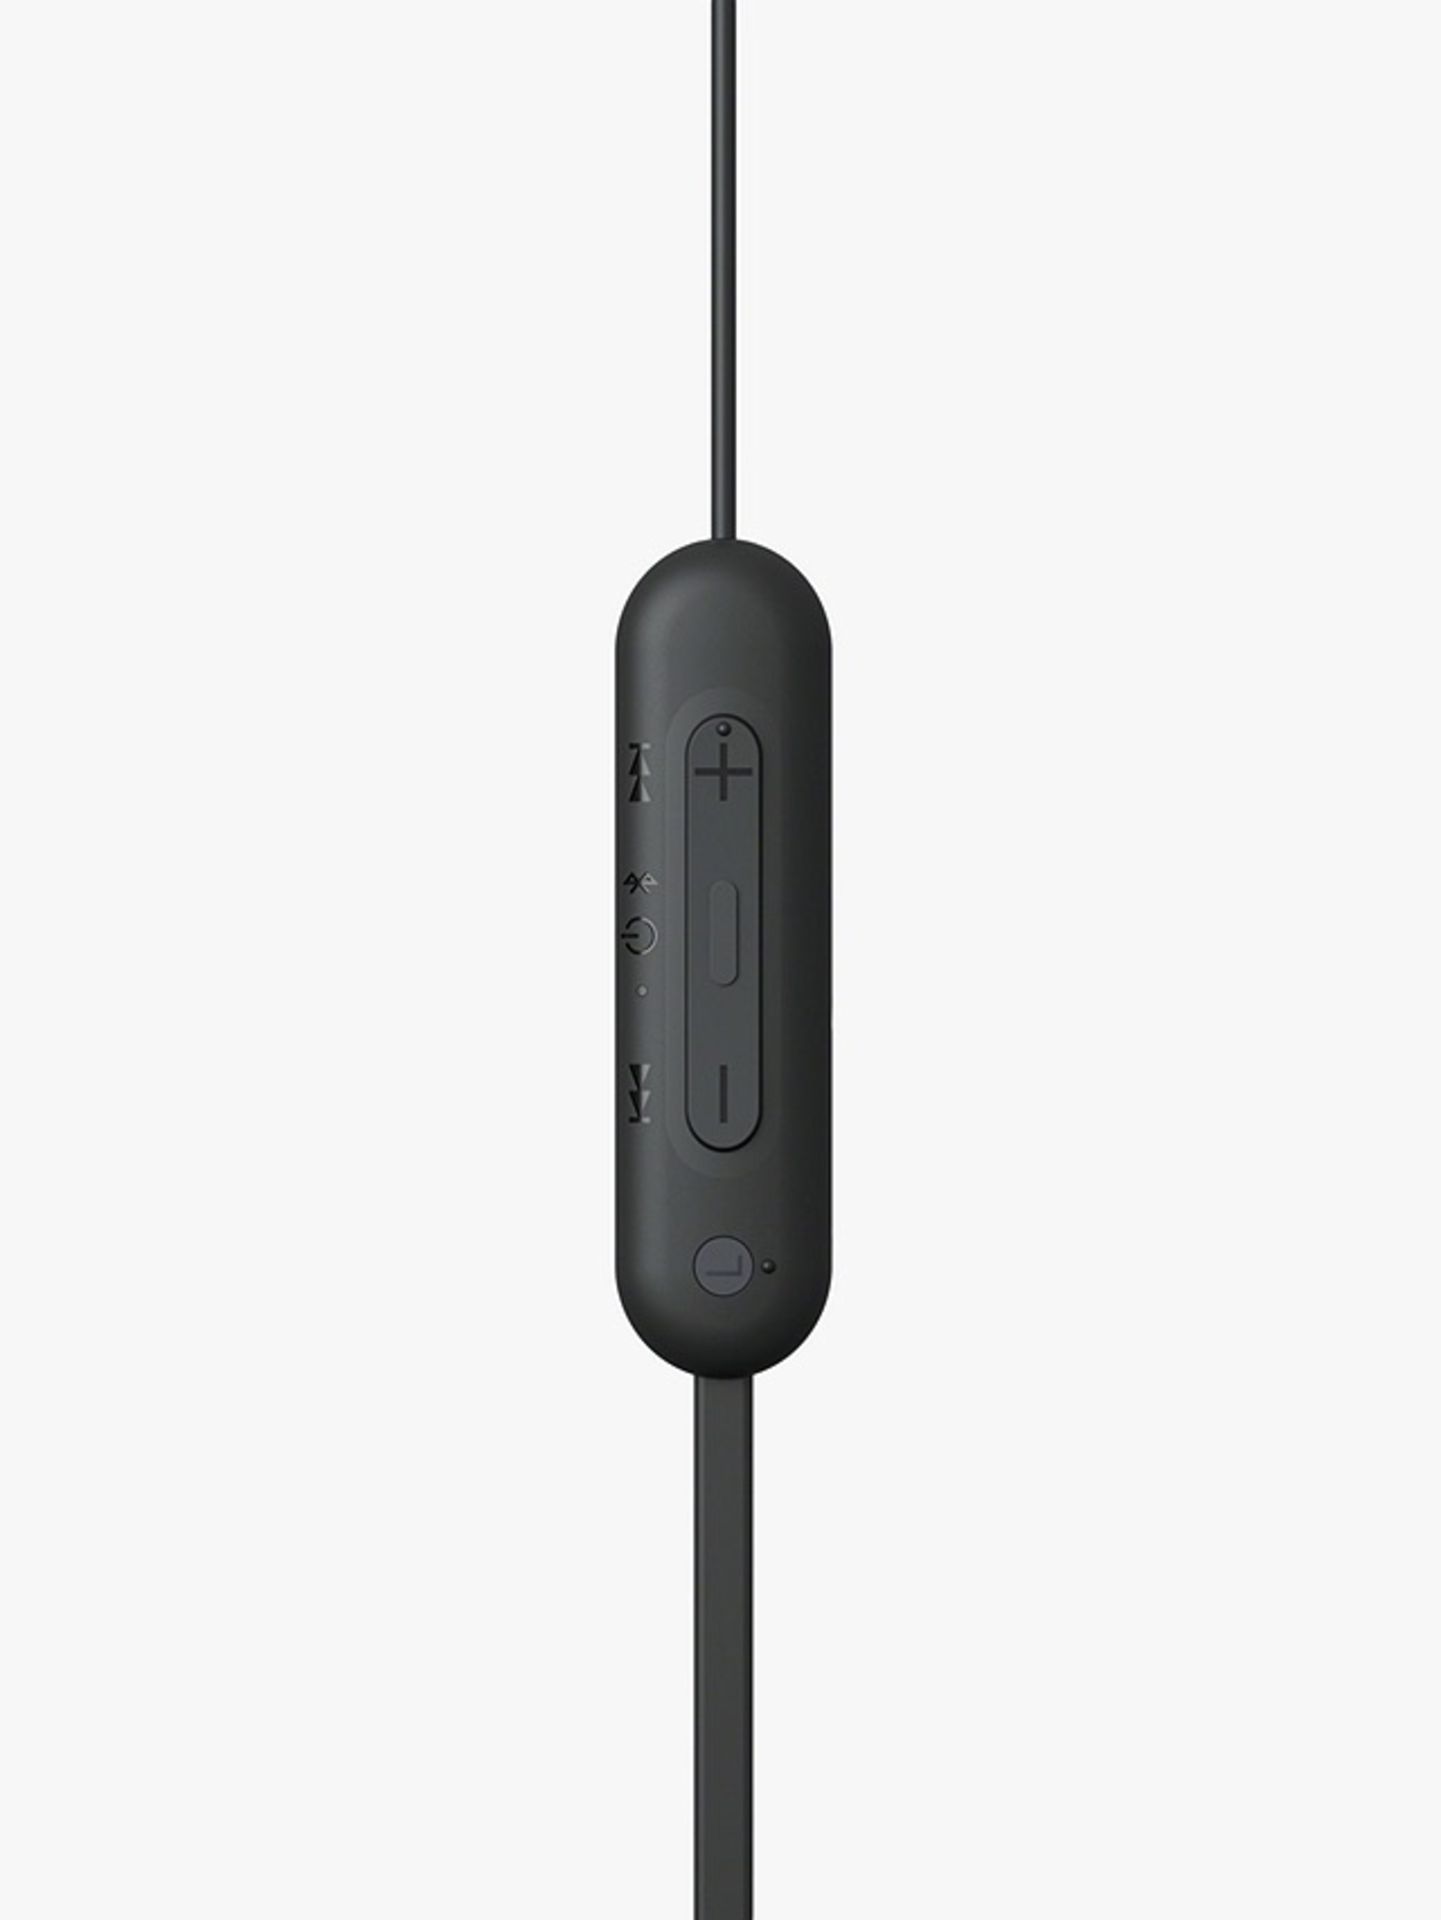 SONY WI-C100 BLUETOOTH WIRELESS IN-EAR HEADPHONES WITH MIC/REMOTE IN BLACK - RRP £35 - Image 3 of 6